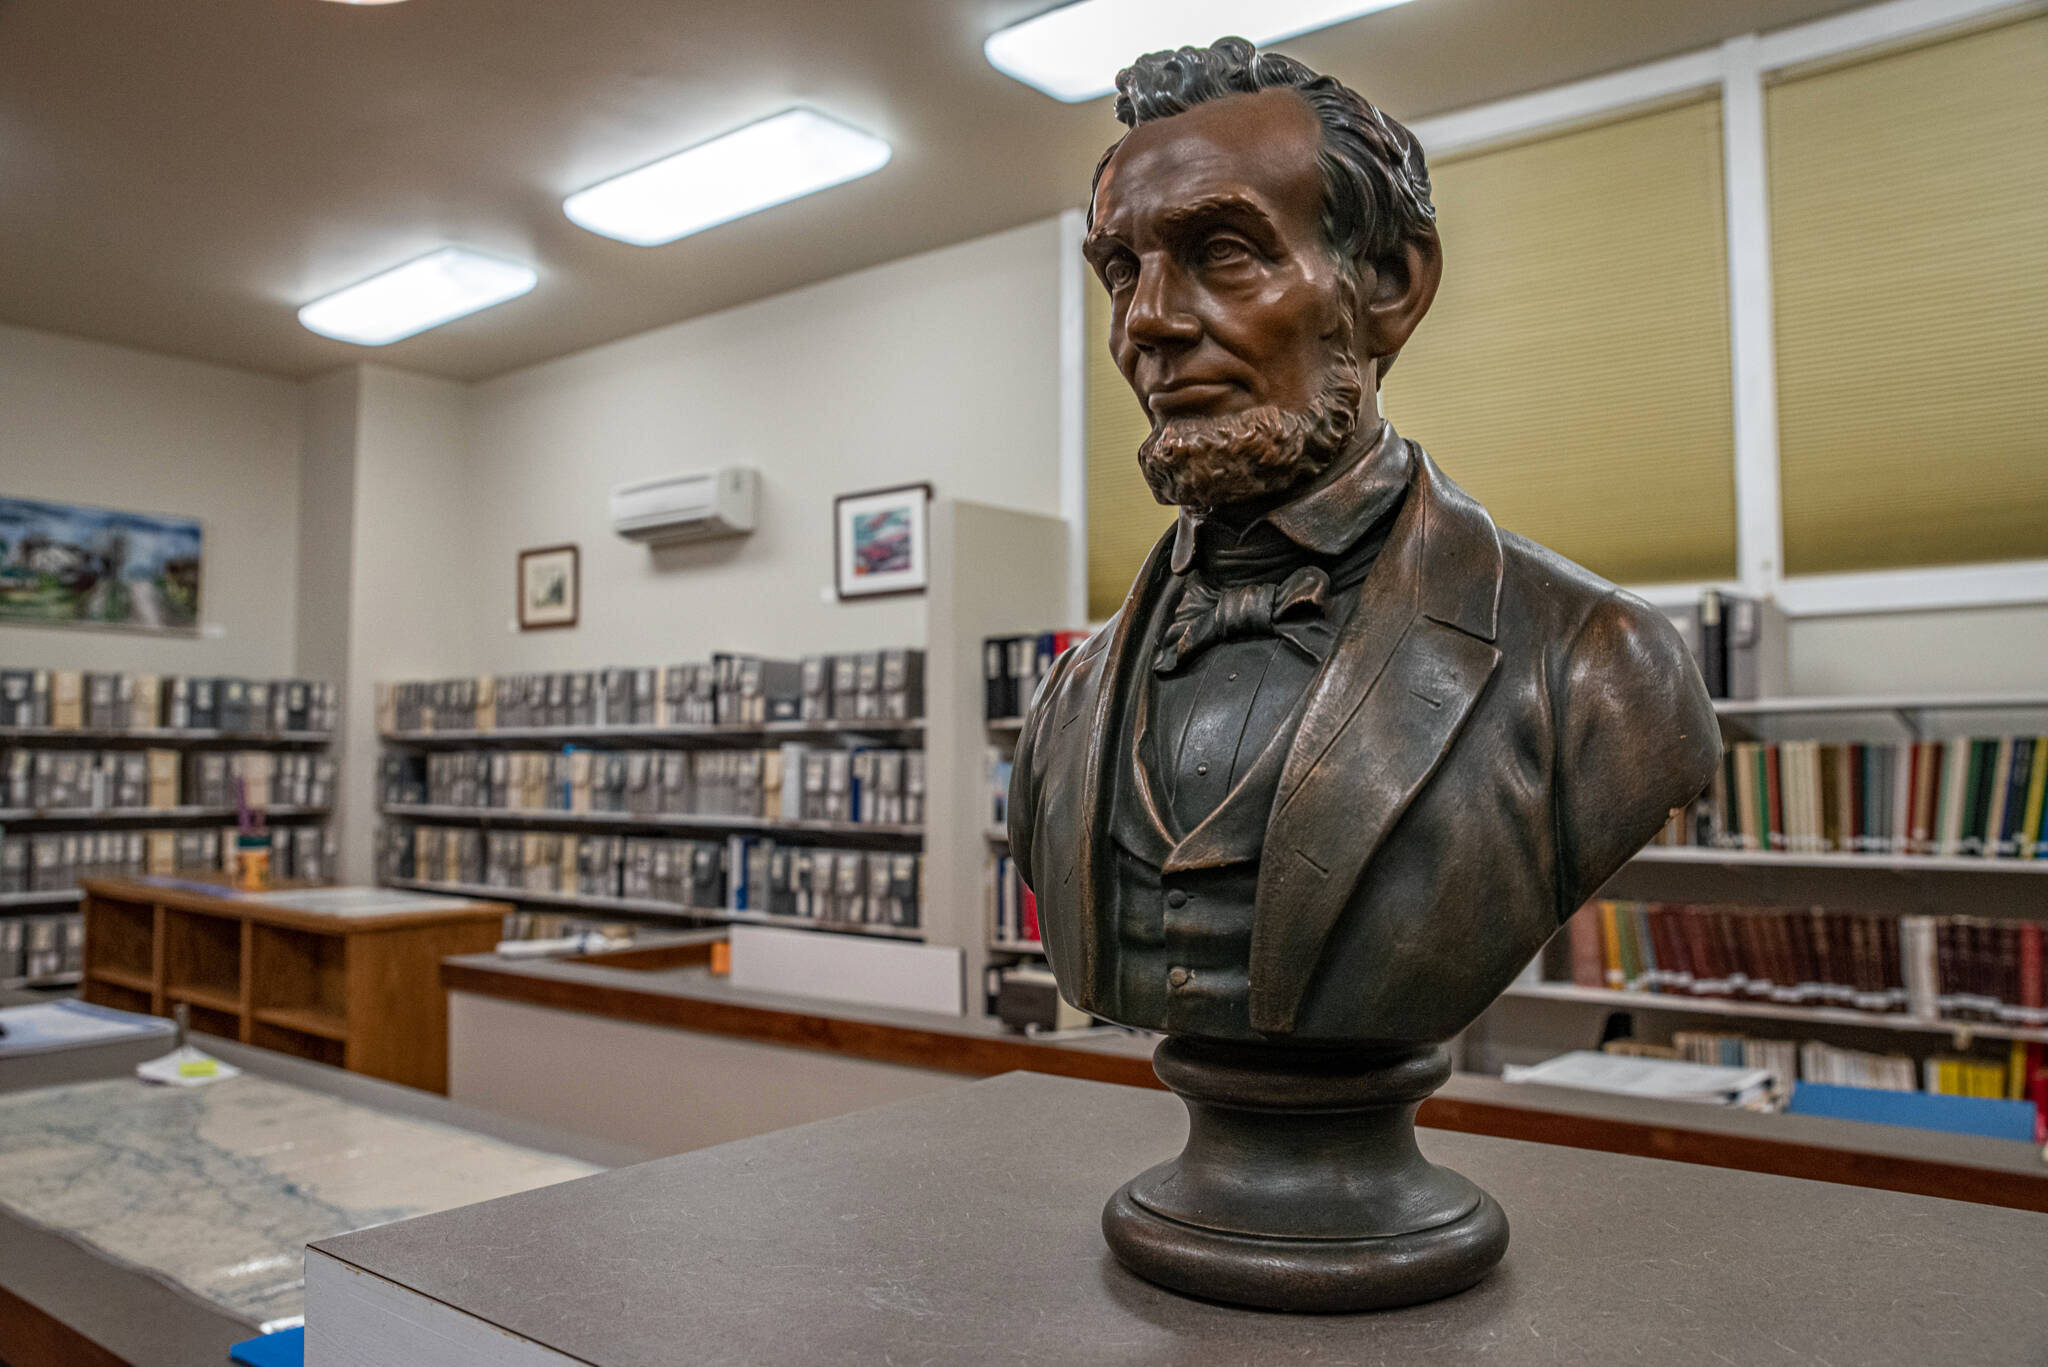 The bust of Lincoln from the former Lincoln School was relocated to the North Olympic History Center’s Research Library.